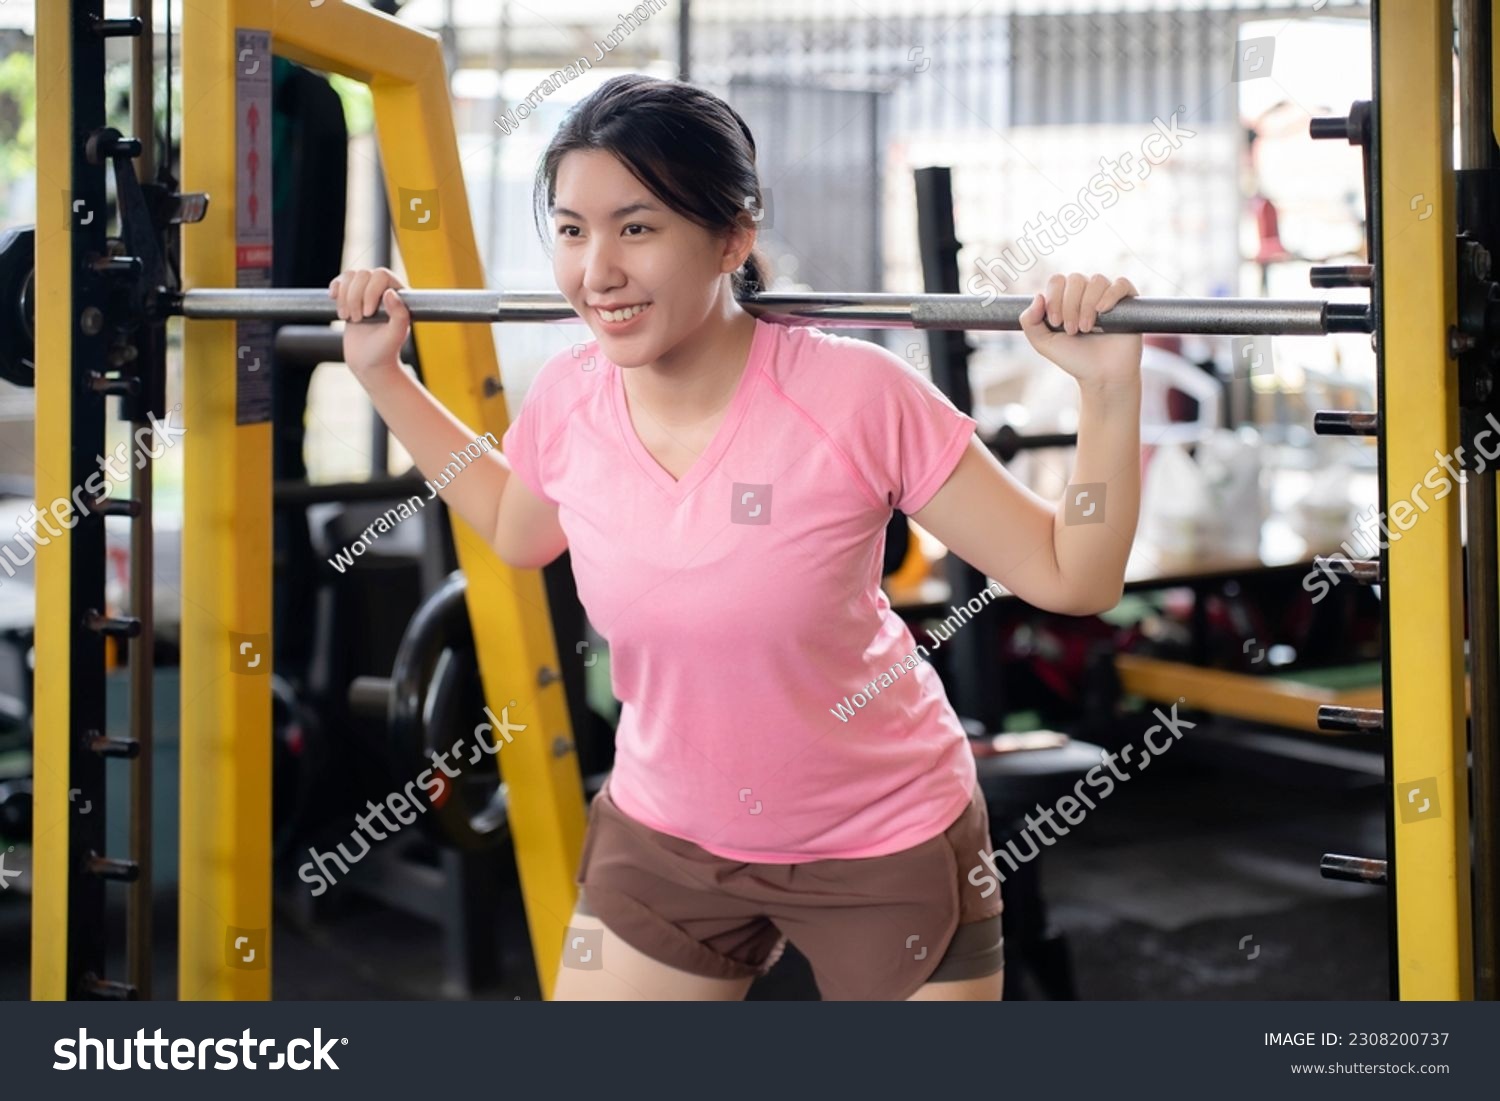 Asian woman exercising to build muscles, toning muscles to keep fit and healthy.Healthcare concept, beginners, self-transformation exercises. #2308200737